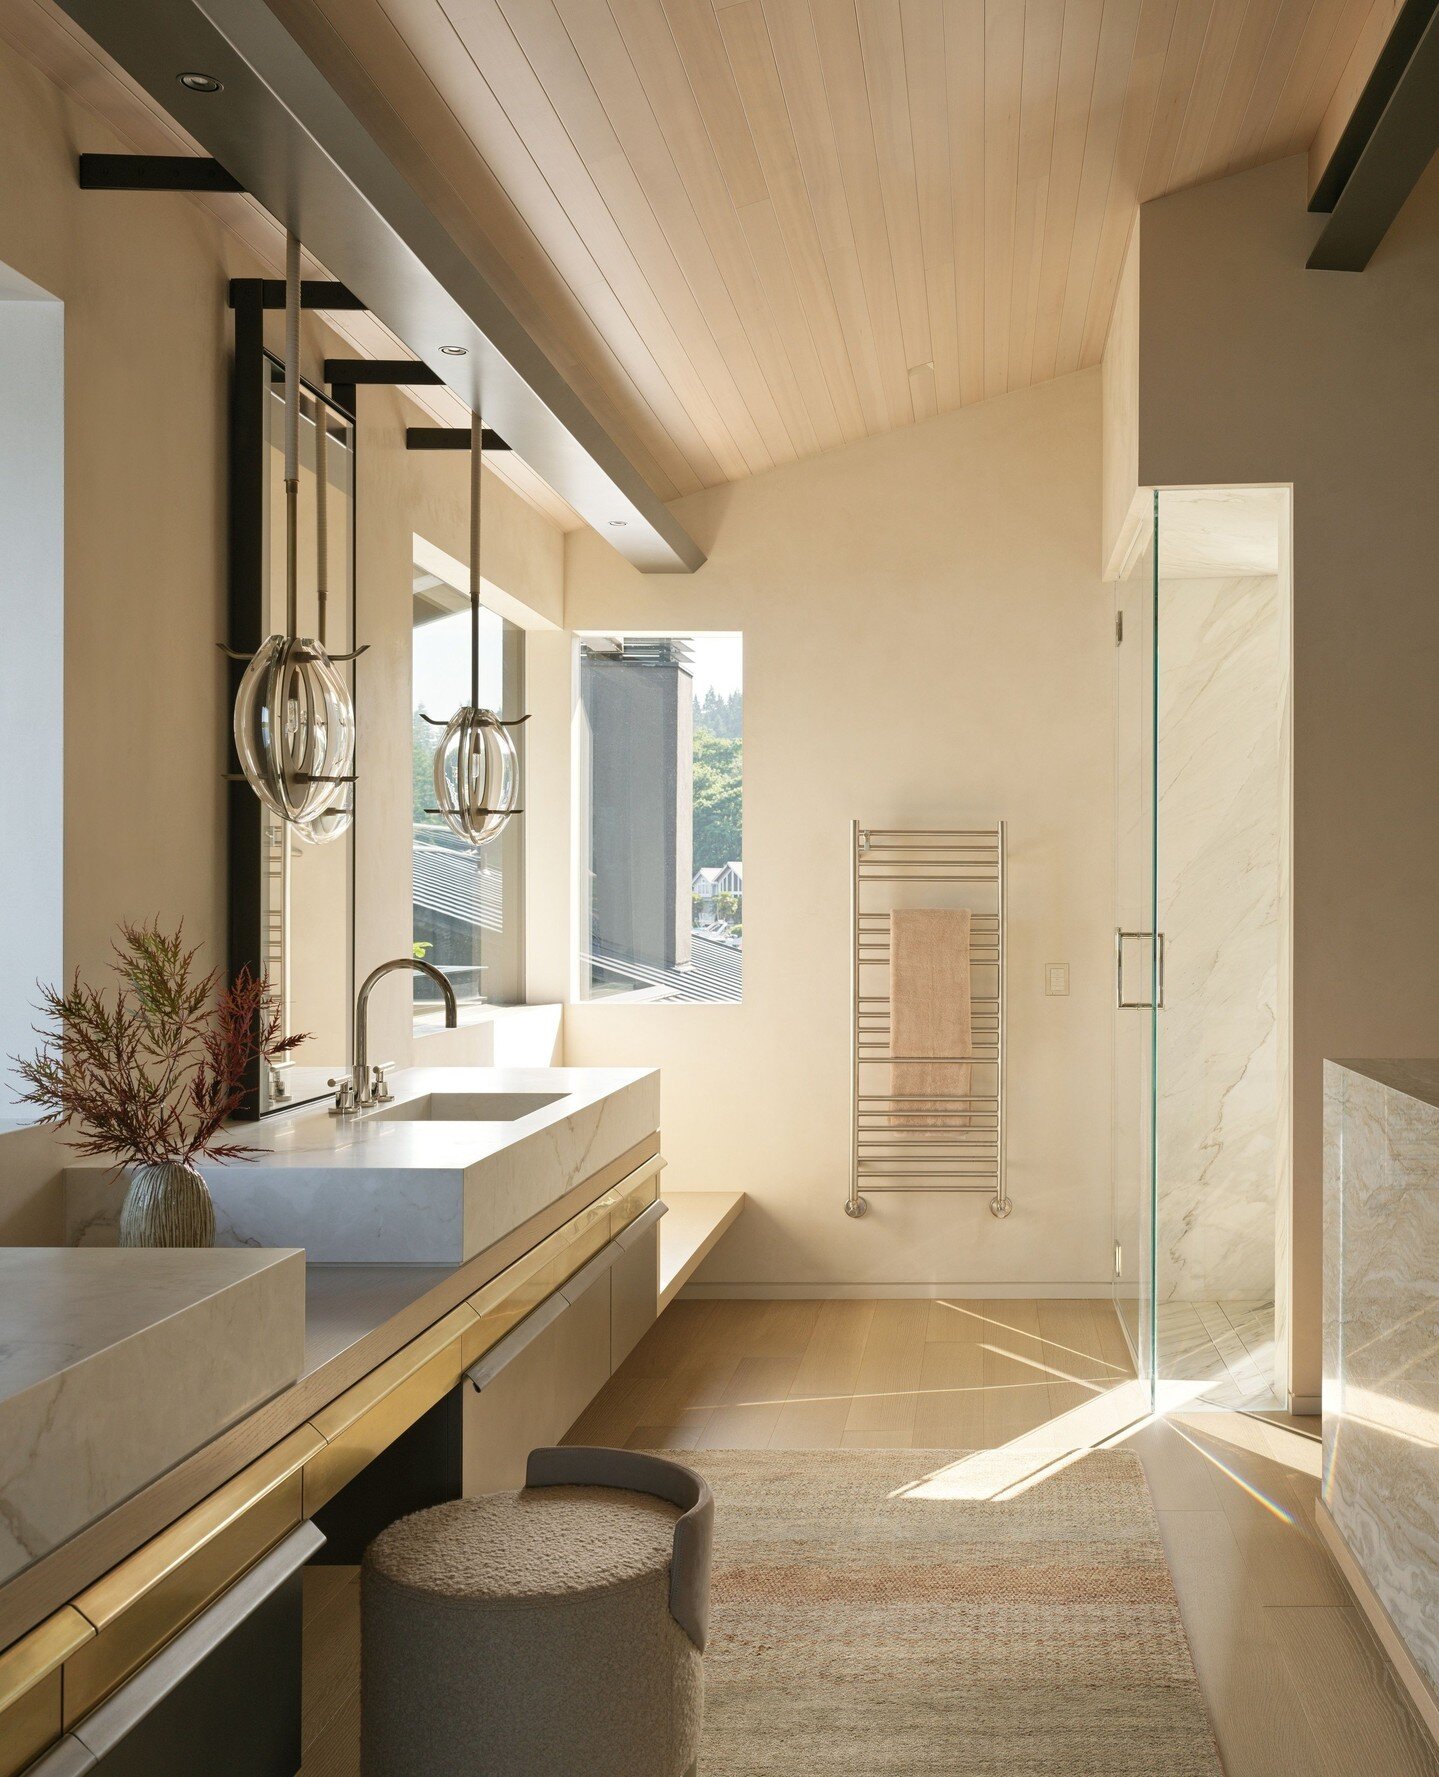 Designed with function at your fingertips this elegant bathroom remodel plays with natural light and sumptuous materials. Thanks to @k7scott for capturing the light and @okanopicardstudio for architectural and interior design collaboration.⁠
⁠
⁠
⁠
⁠
